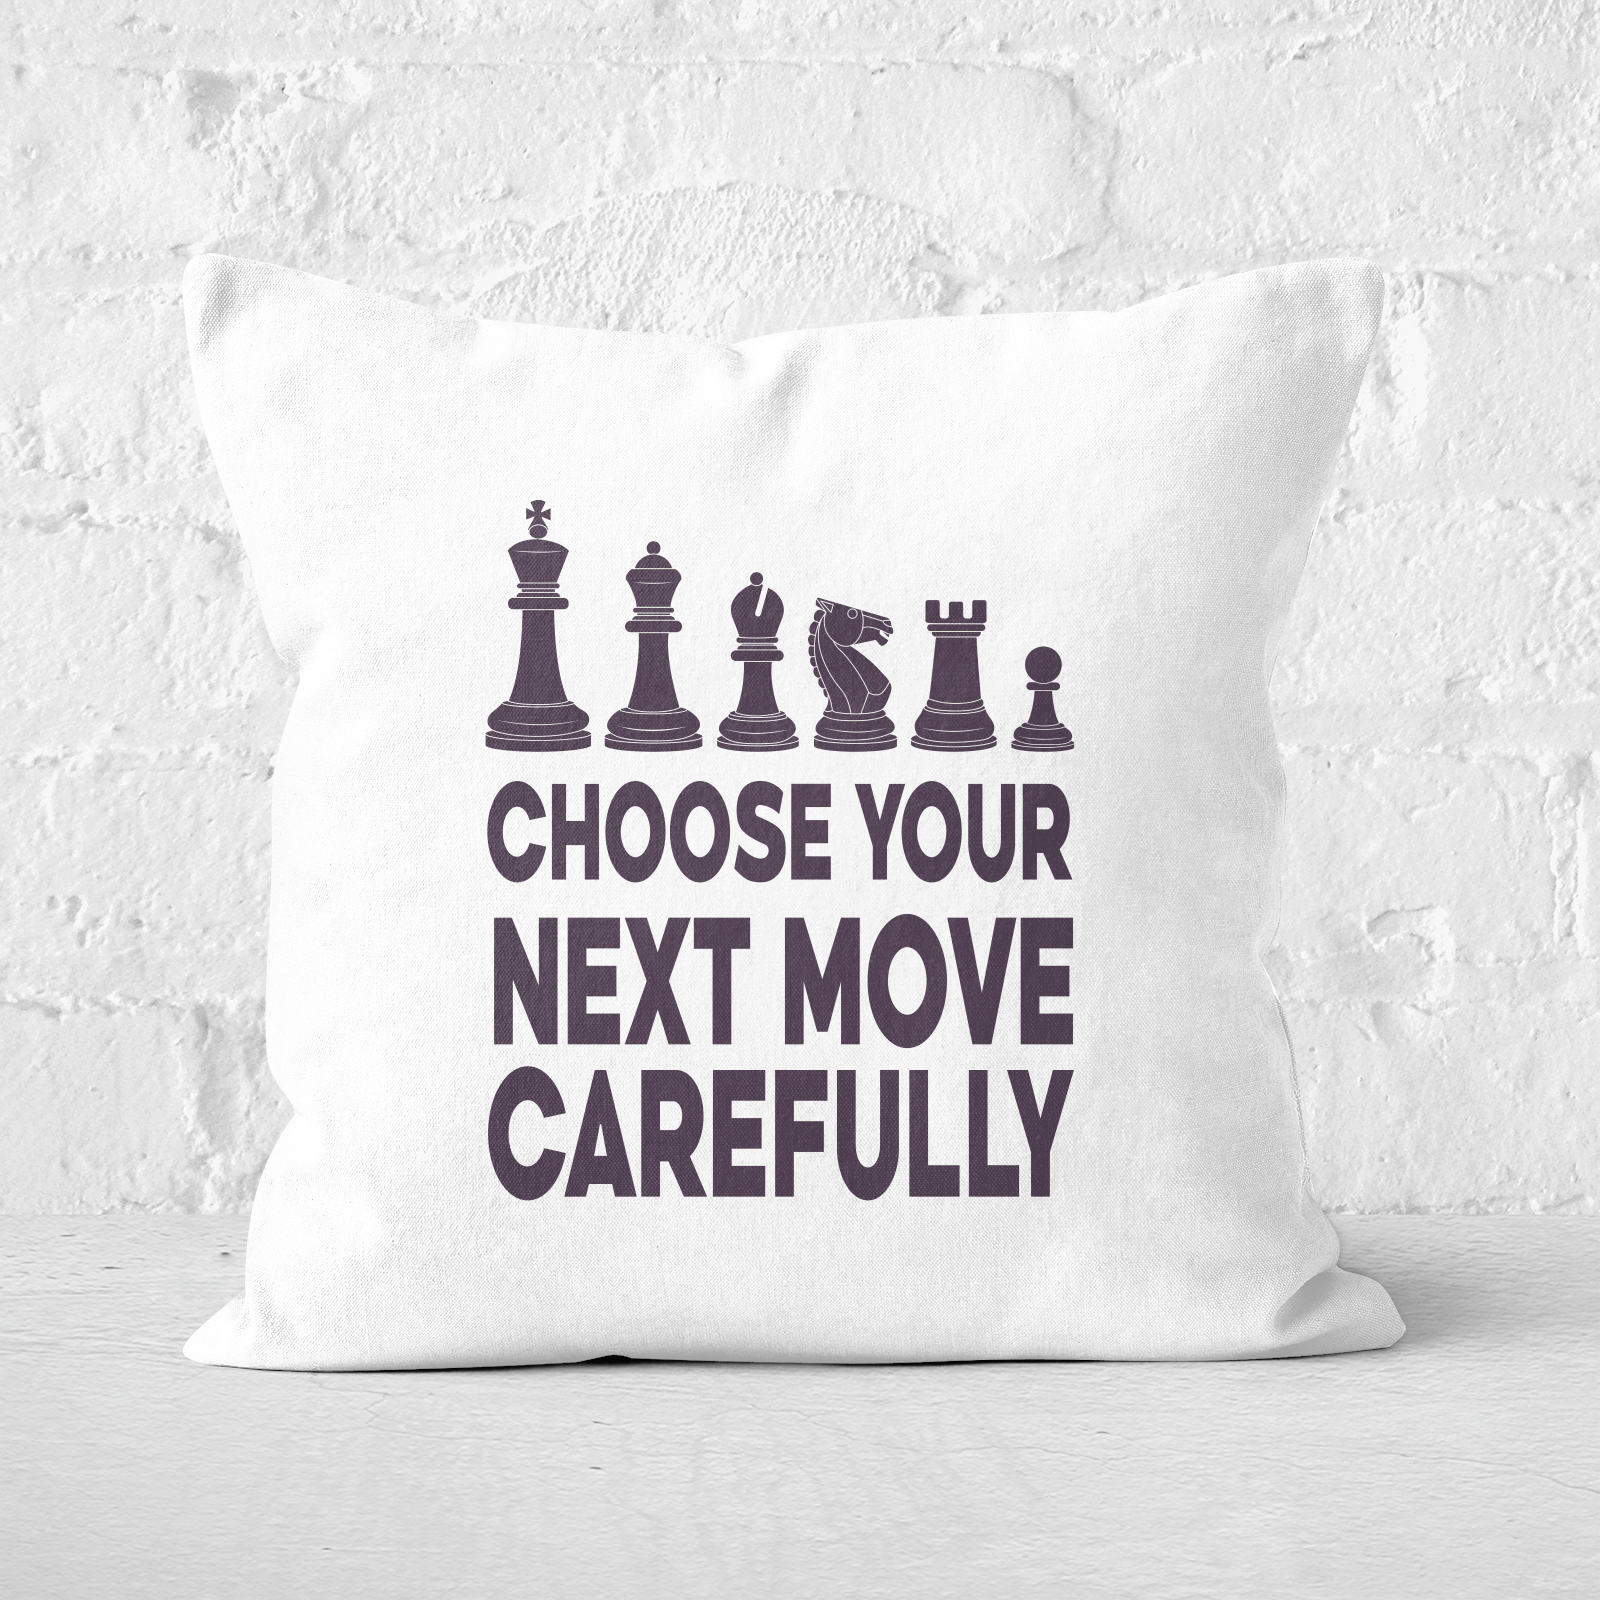 Choose Your Next Move Carefully Square Cushion - 60x60cm - Soft Touch